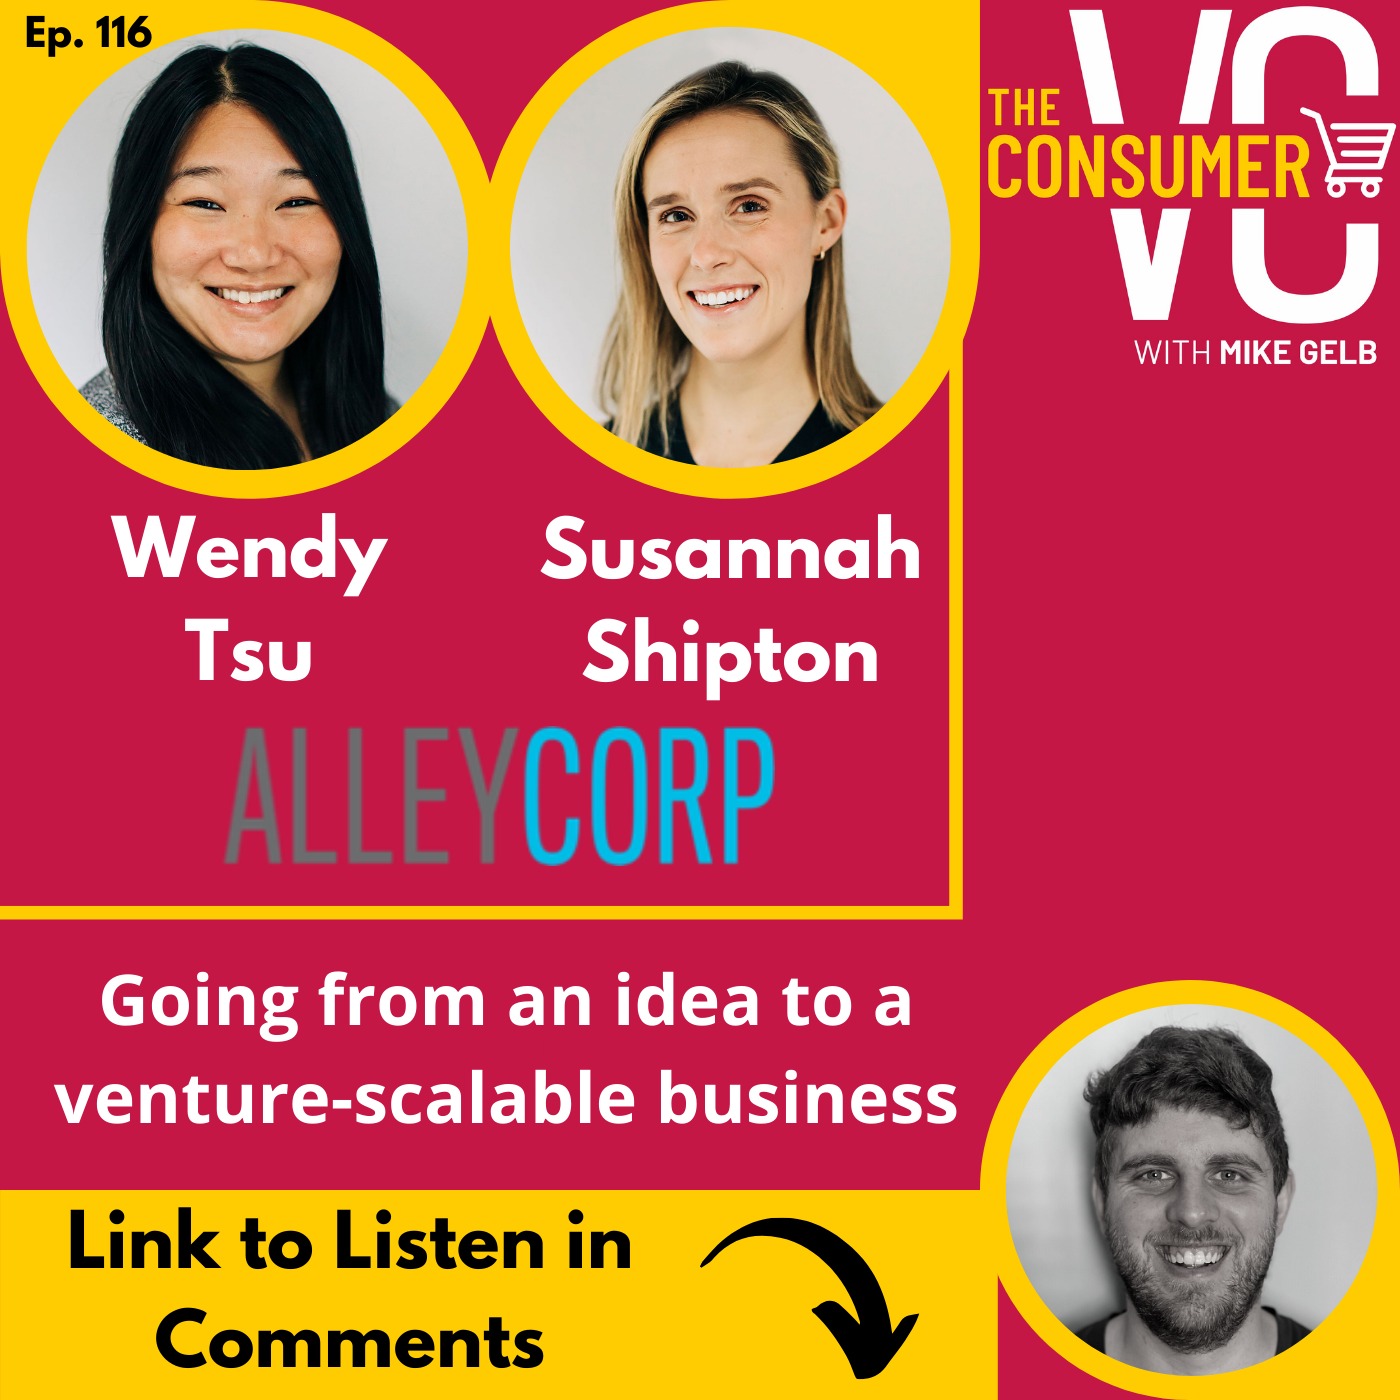 Wendy Tsu & Susannah Shipton (AlleyCorp) - Going from idea to venture-scalable business